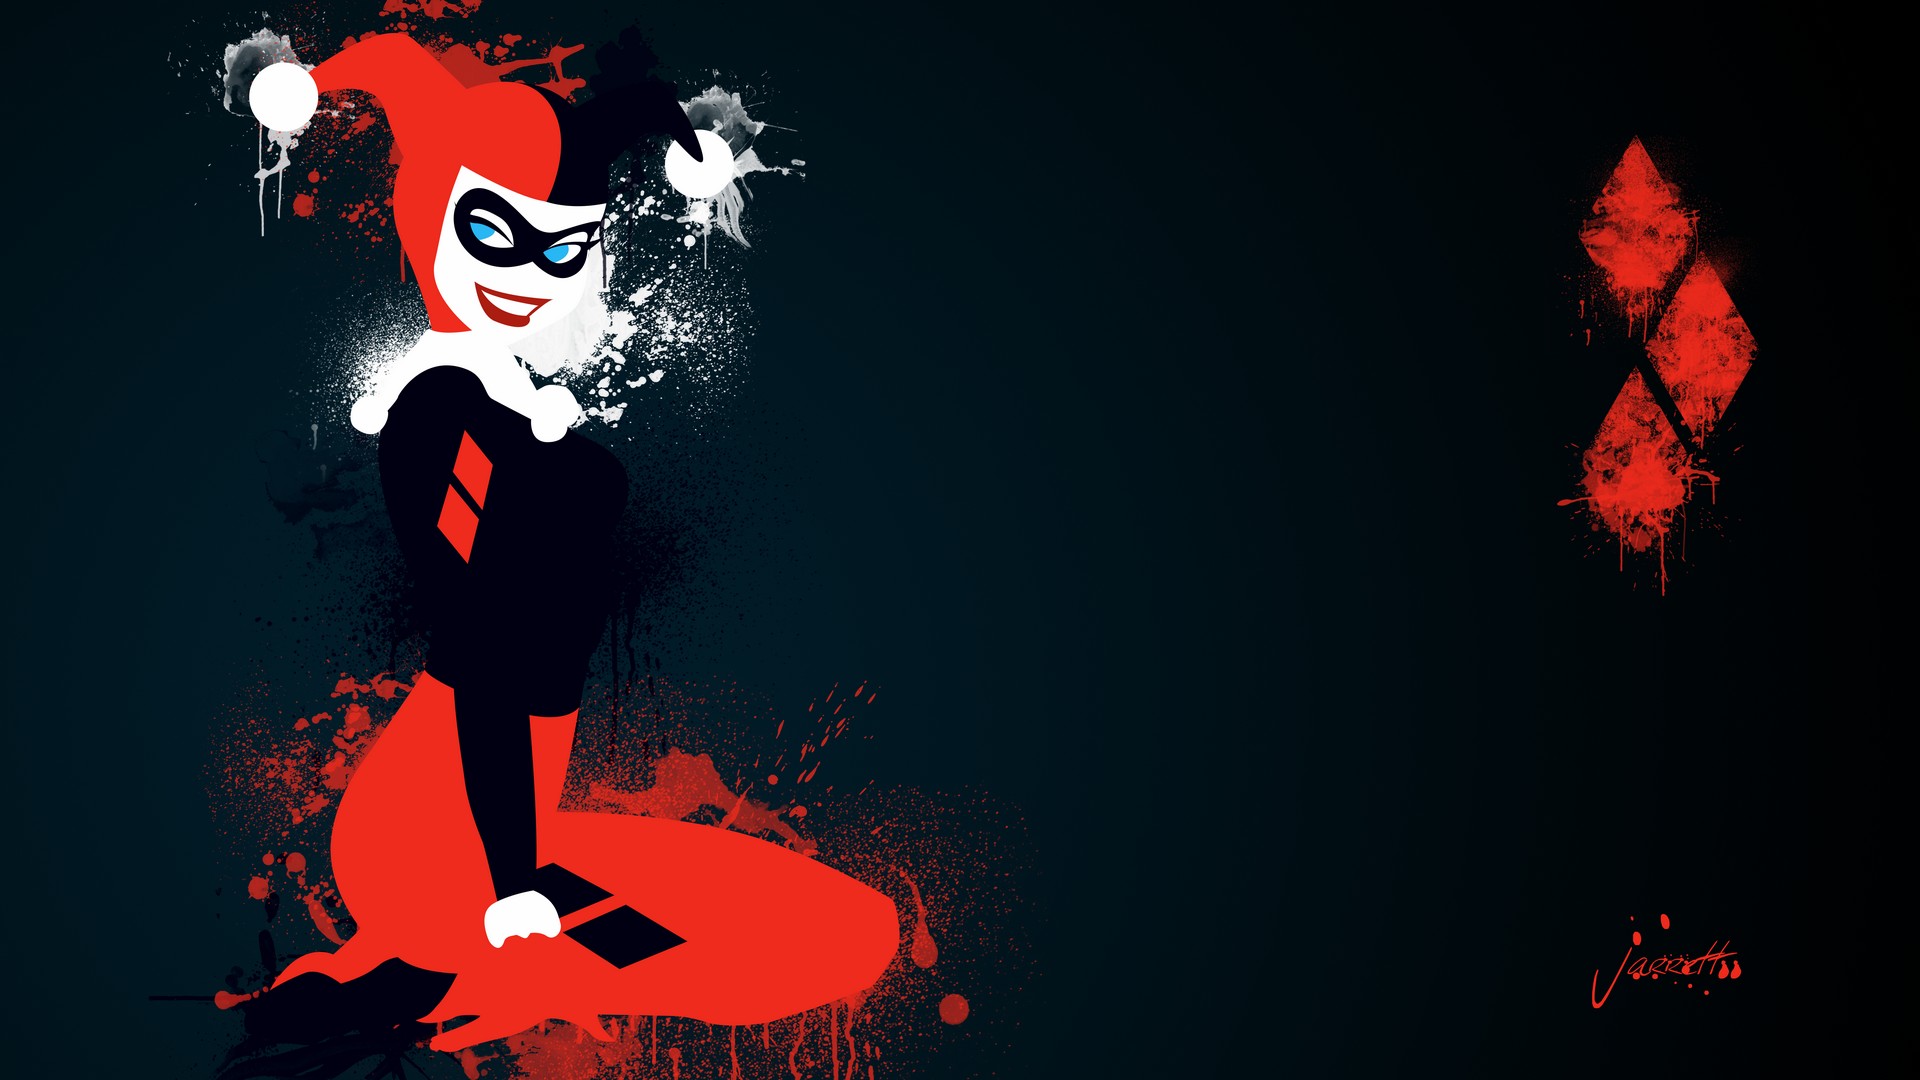 Wallpaper Harley Quinn The Movie Desktop With Image - Harley Quinn Background - HD Wallpaper 